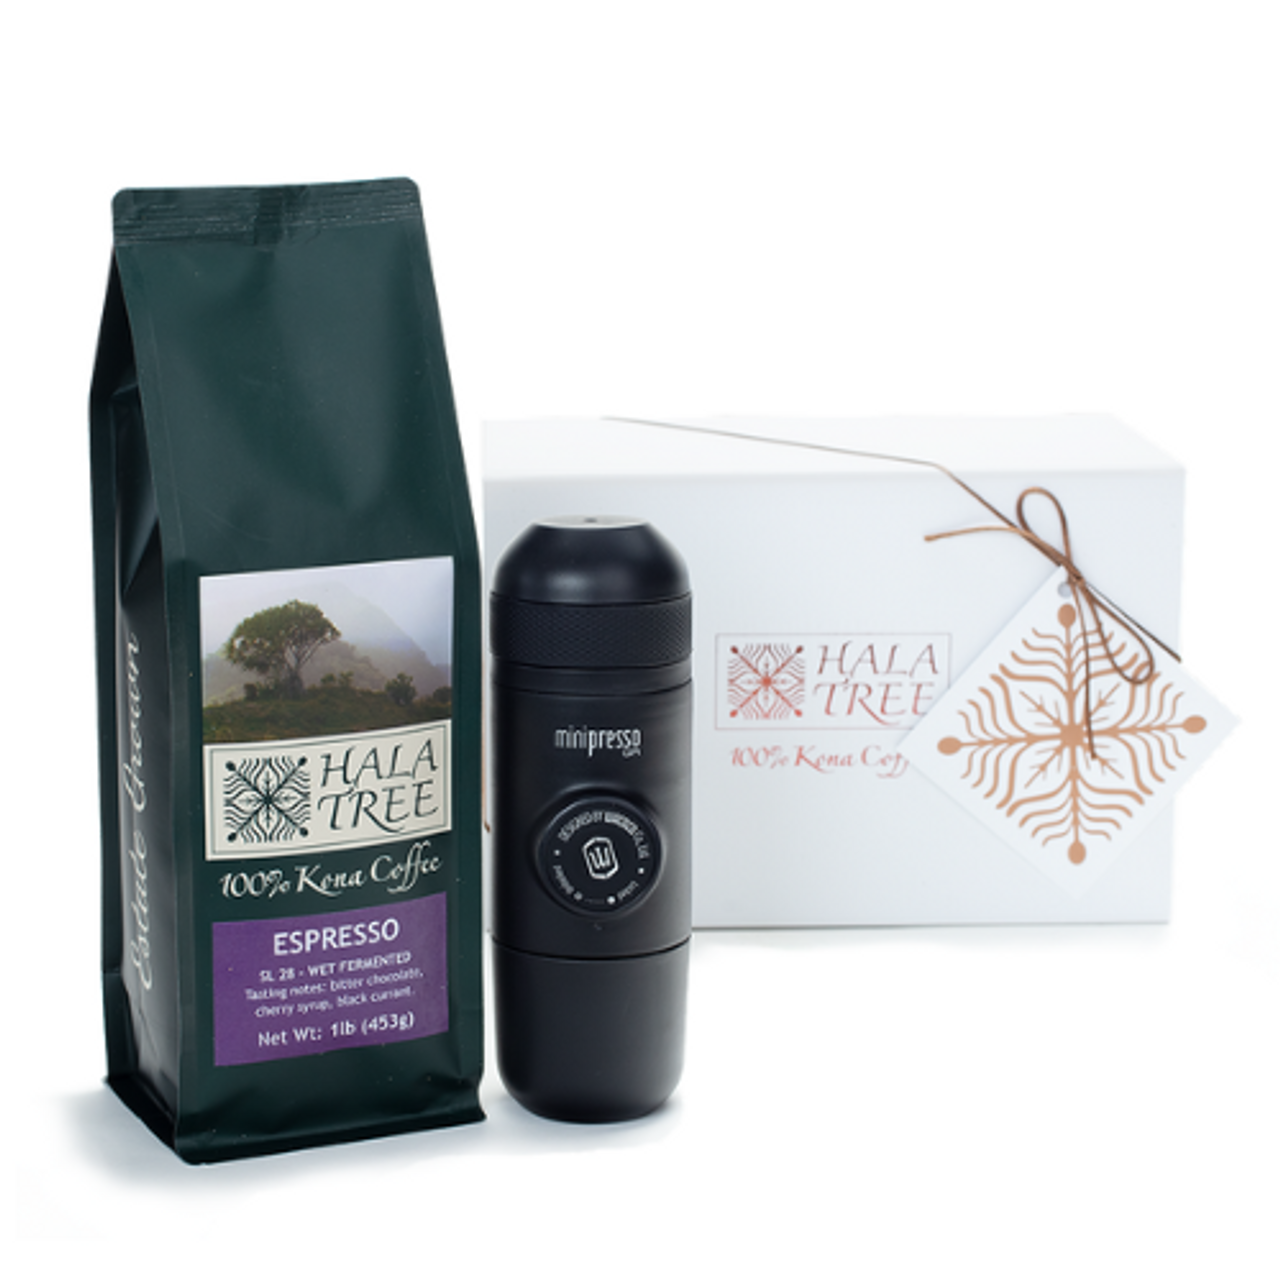 Adventurous Gifts for Coffee Lovers Nespresso Holiday Gift Guide